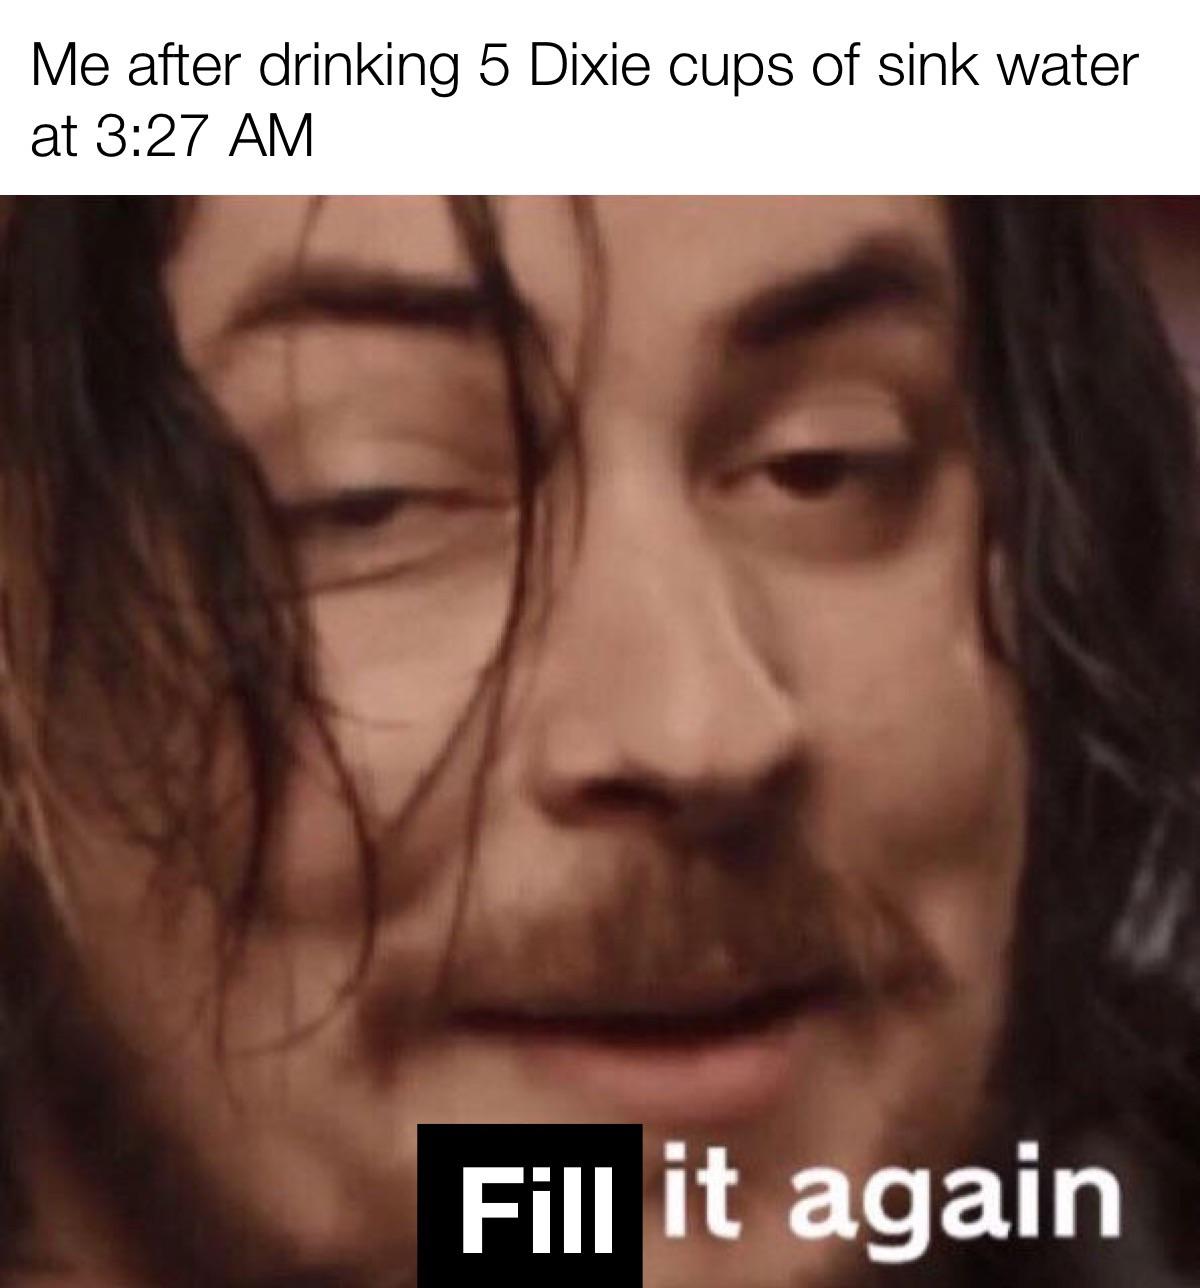 Dank Meme dank-memes cute text: Me after drinking 5 Dixie cups of sink water at 3:27 AM Fill it again 